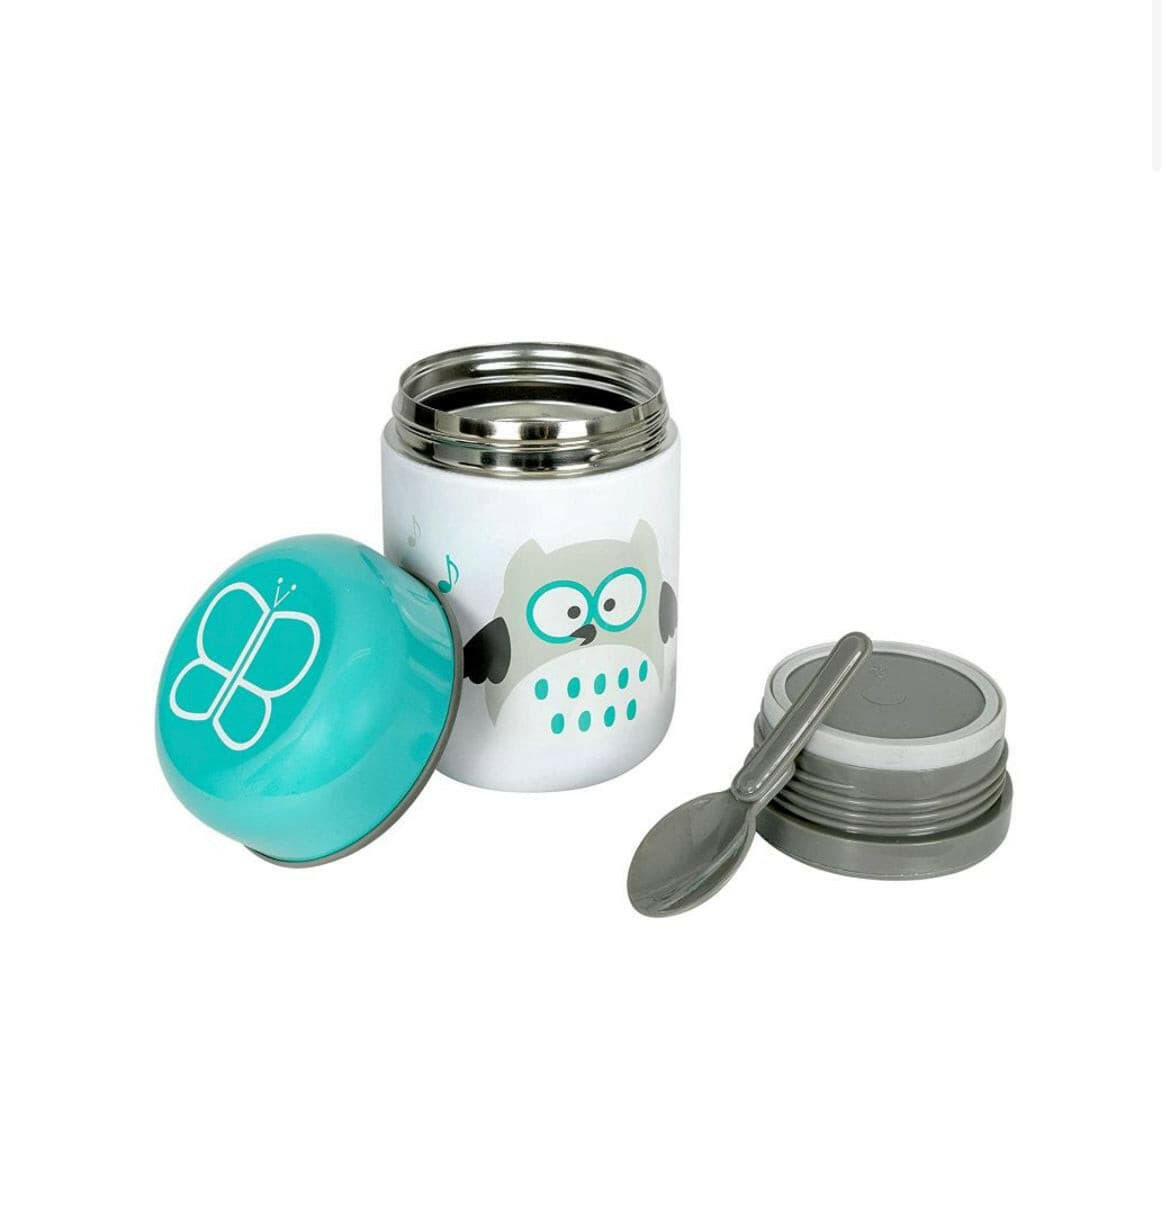 BBLUV Foöd - Thermal food container with spoon.